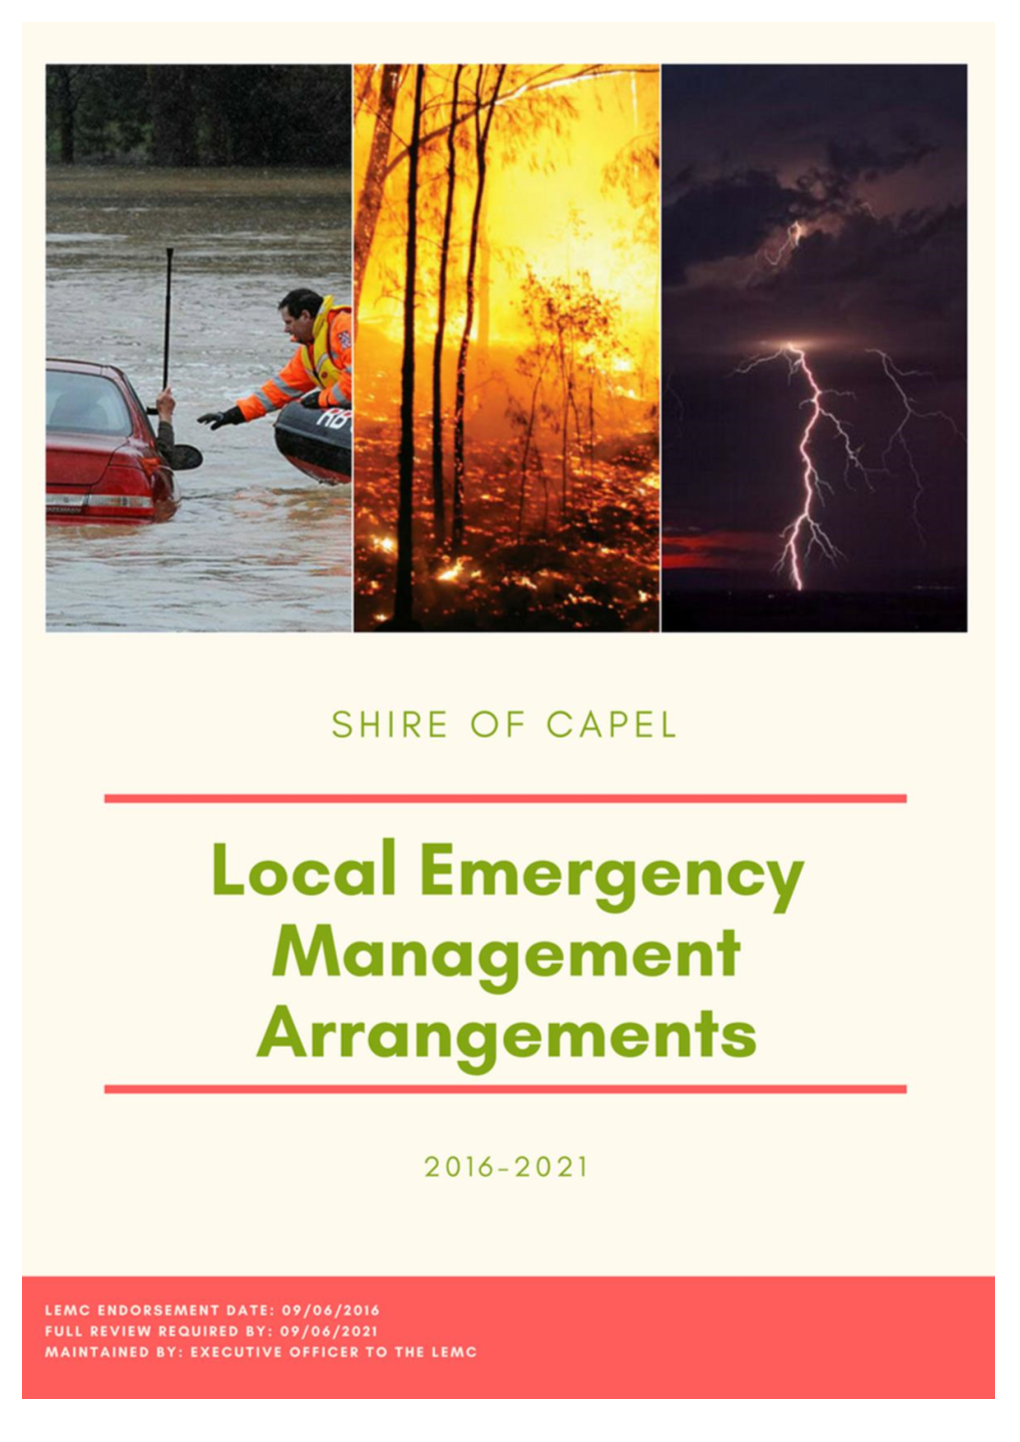 Local Emergency Management Arrangements Version 1.1 Page 1 of 73 Page Intentionally Left Blank